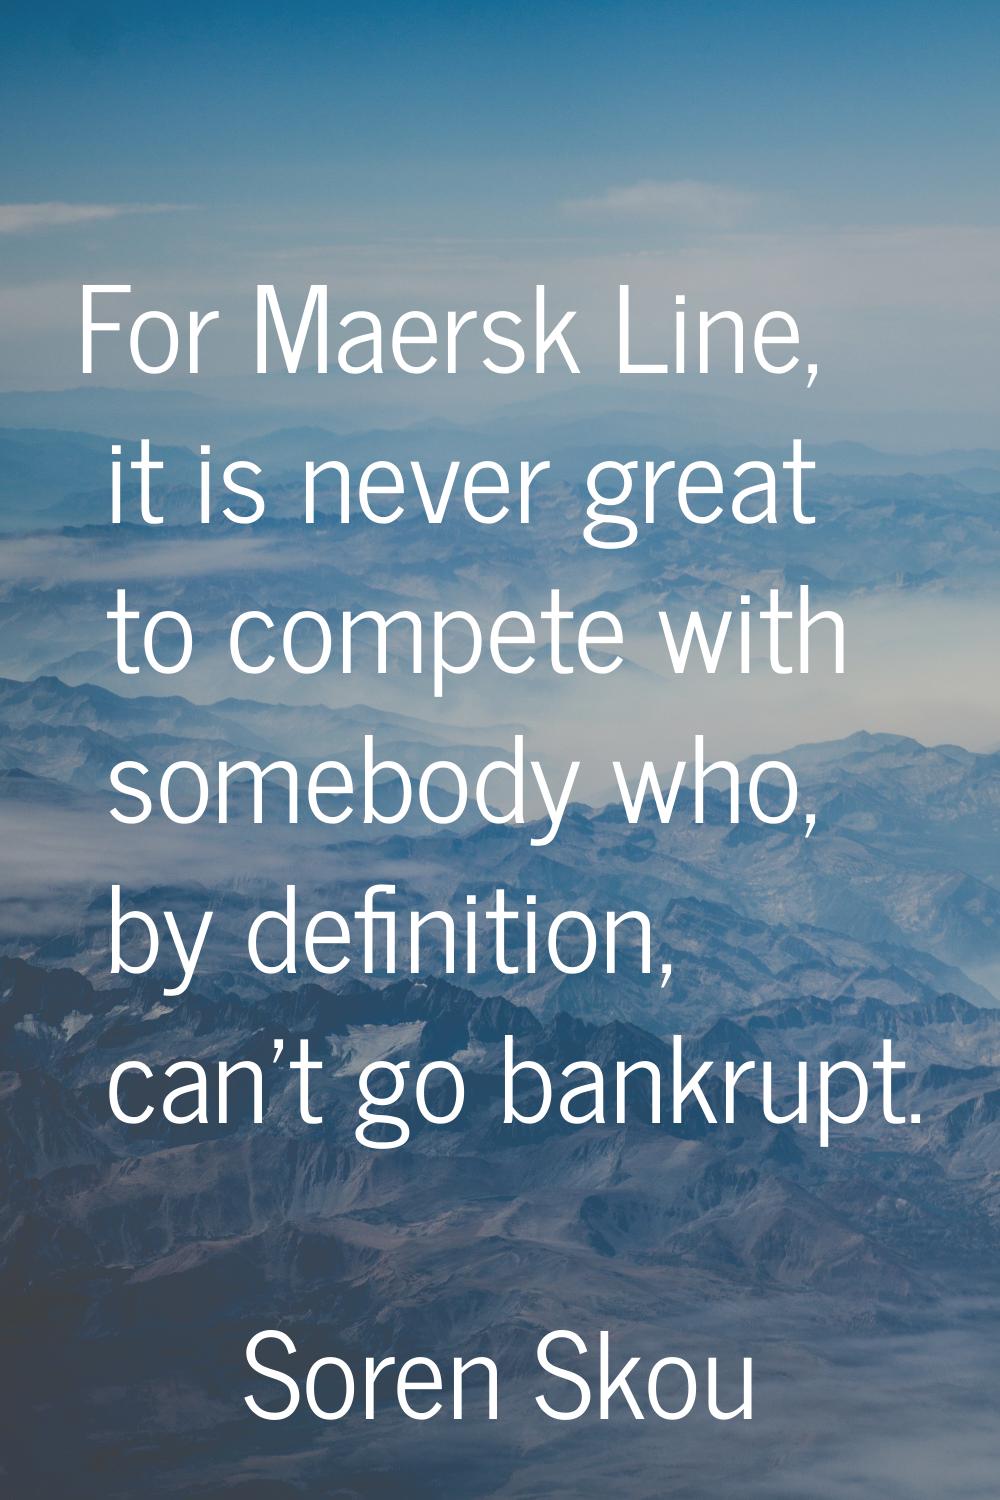 For Maersk Line, it is never great to compete with somebody who, by definition, can't go bankrupt.